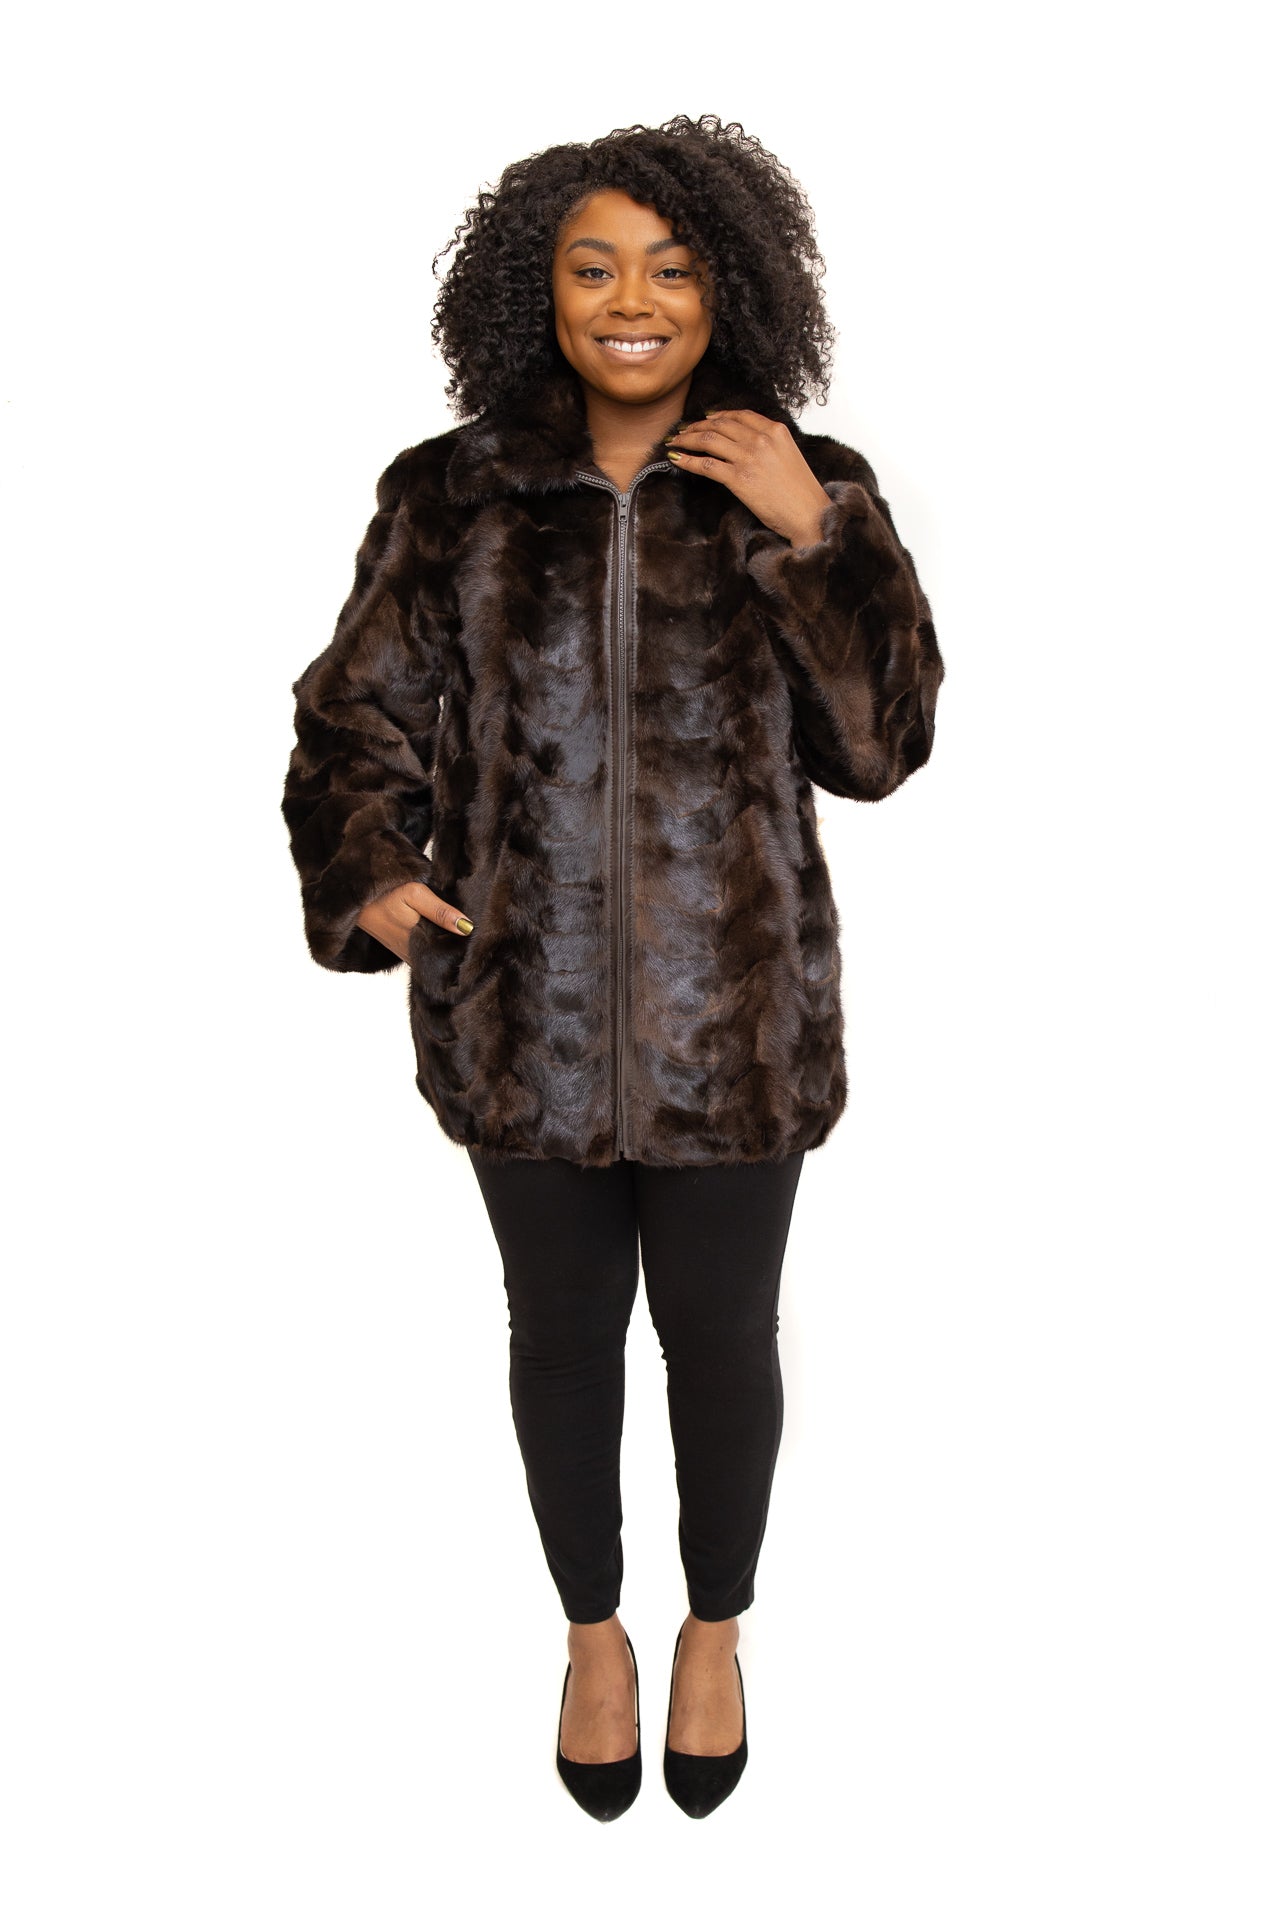 Ranch Mink Paw Zipper Jacket with Full Skin Mink Collar Available in Akron at Summit Mall and ETON Chagrin Boulevard